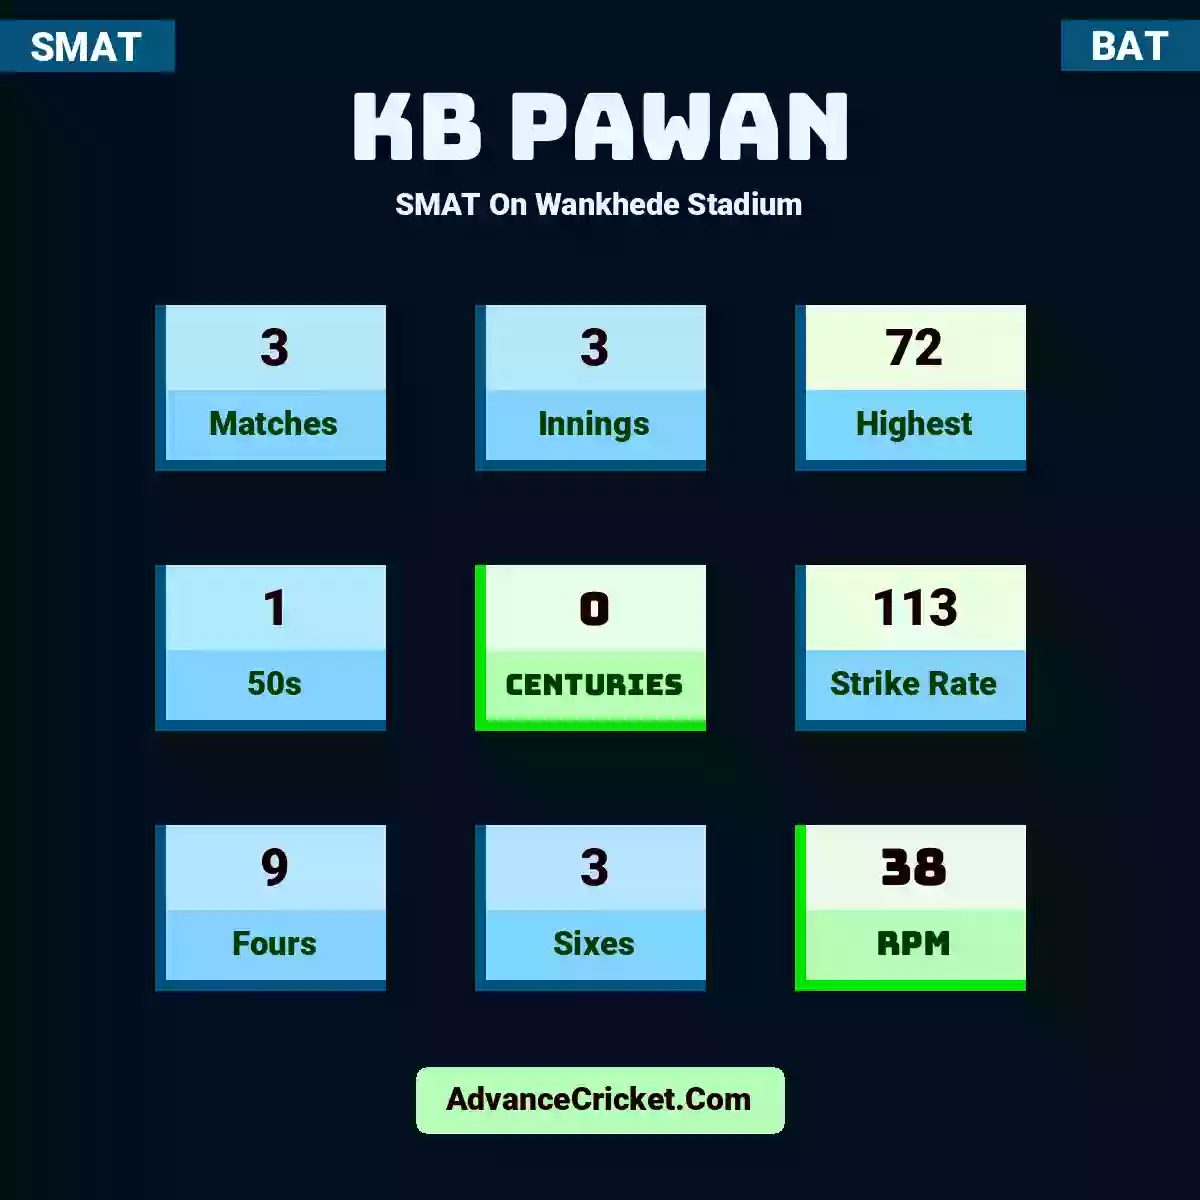 KB Pawan SMAT  On Wankhede Stadium, KB Pawan played 3 matches, scored 72 runs as highest, 1 half-centuries, and 0 centuries, with a strike rate of 113. K.Pawan hit 9 fours and 3 sixes, with an RPM of 38.